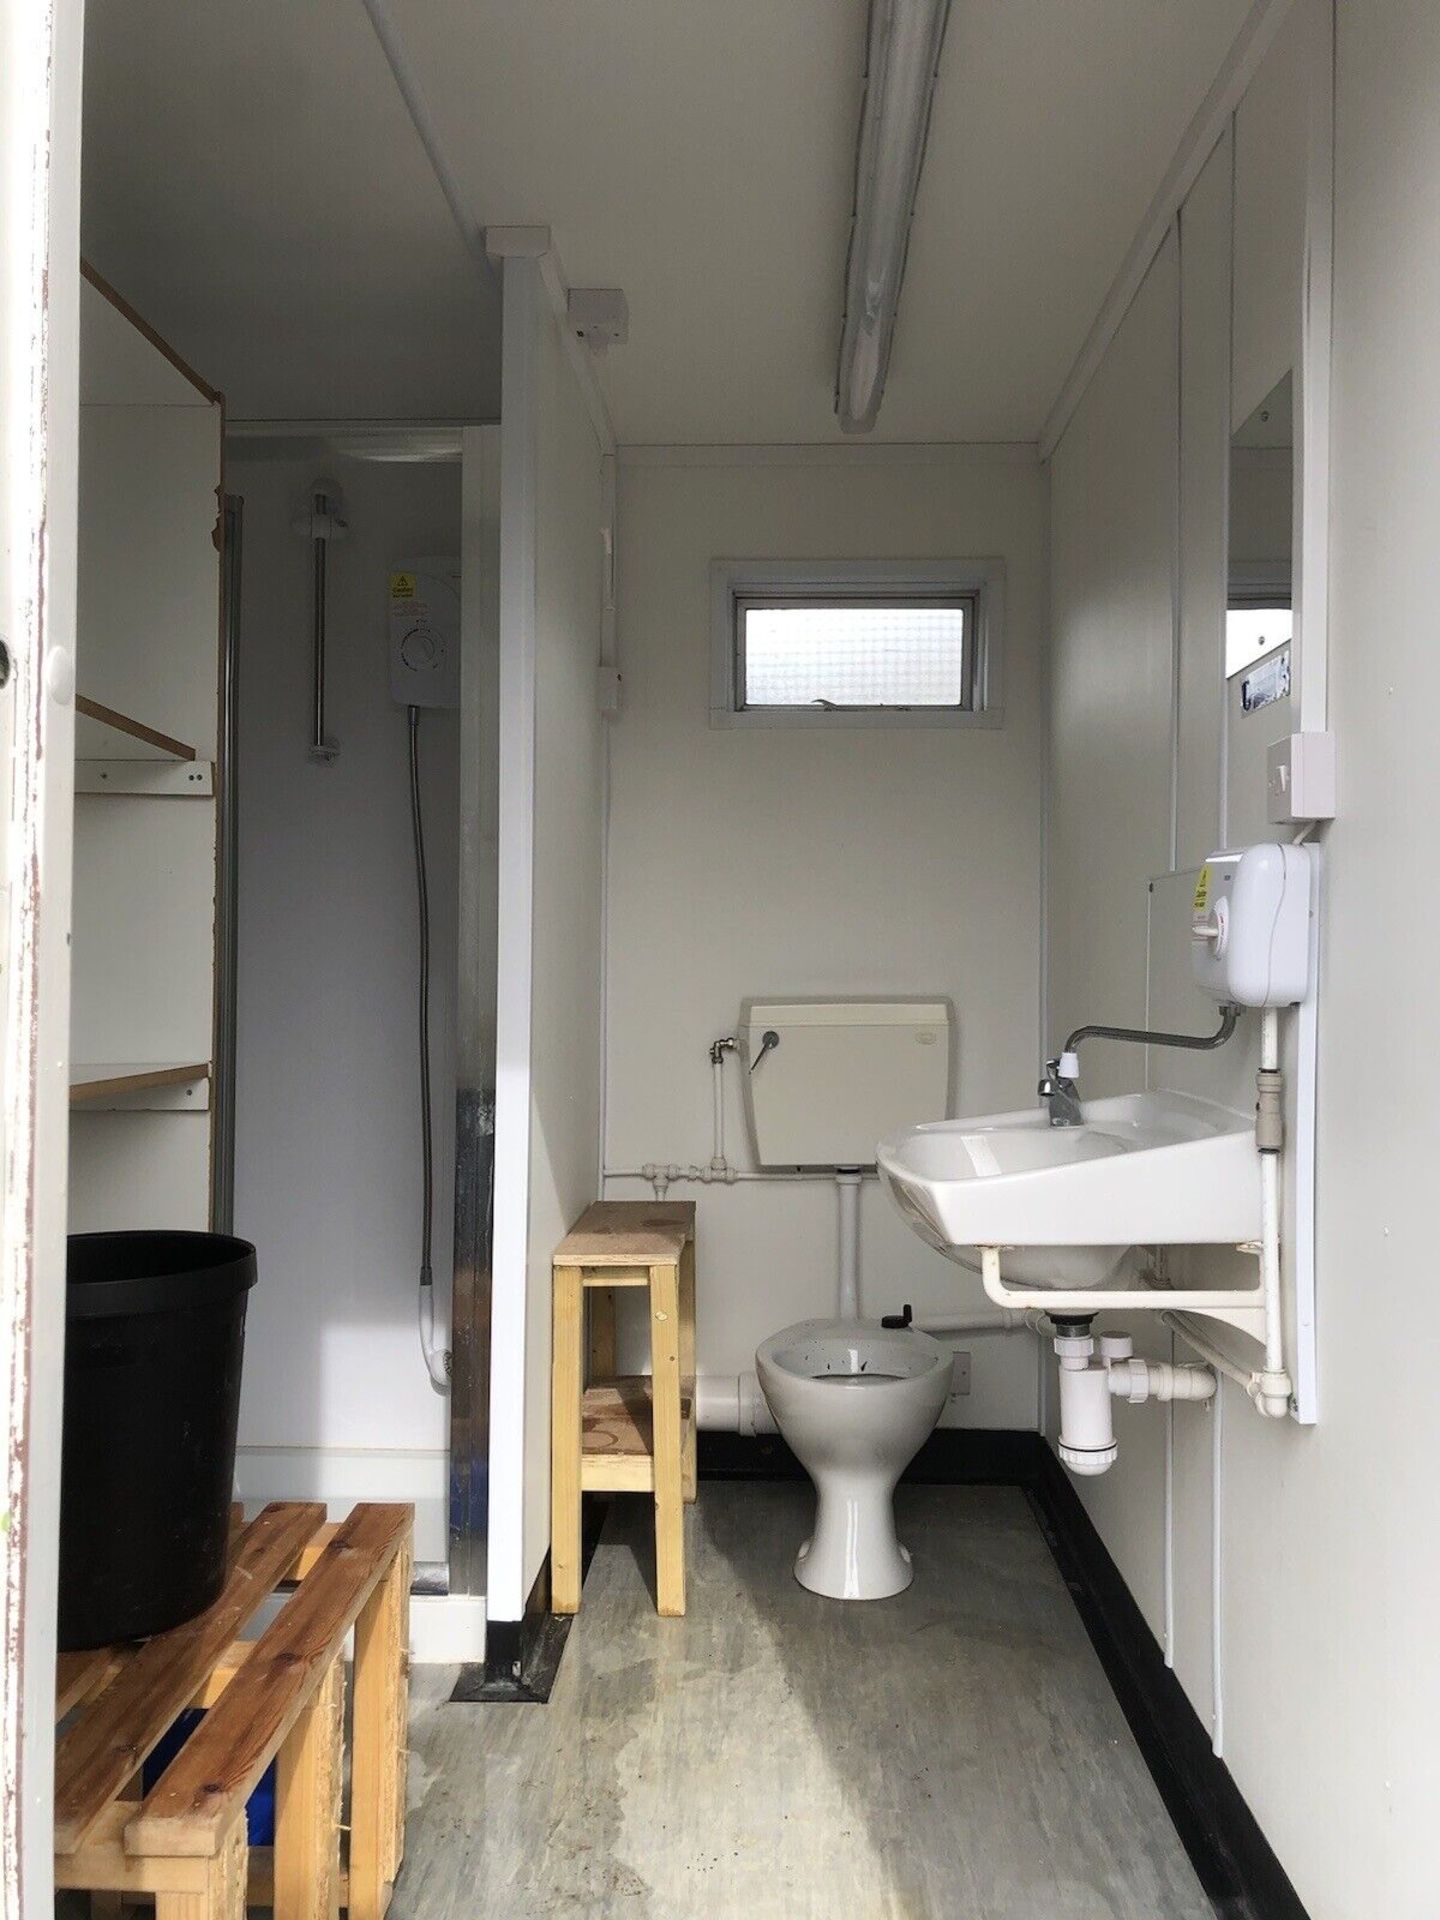 Portable Toilet Block With Shower Disabled Wheelch - Image 8 of 10